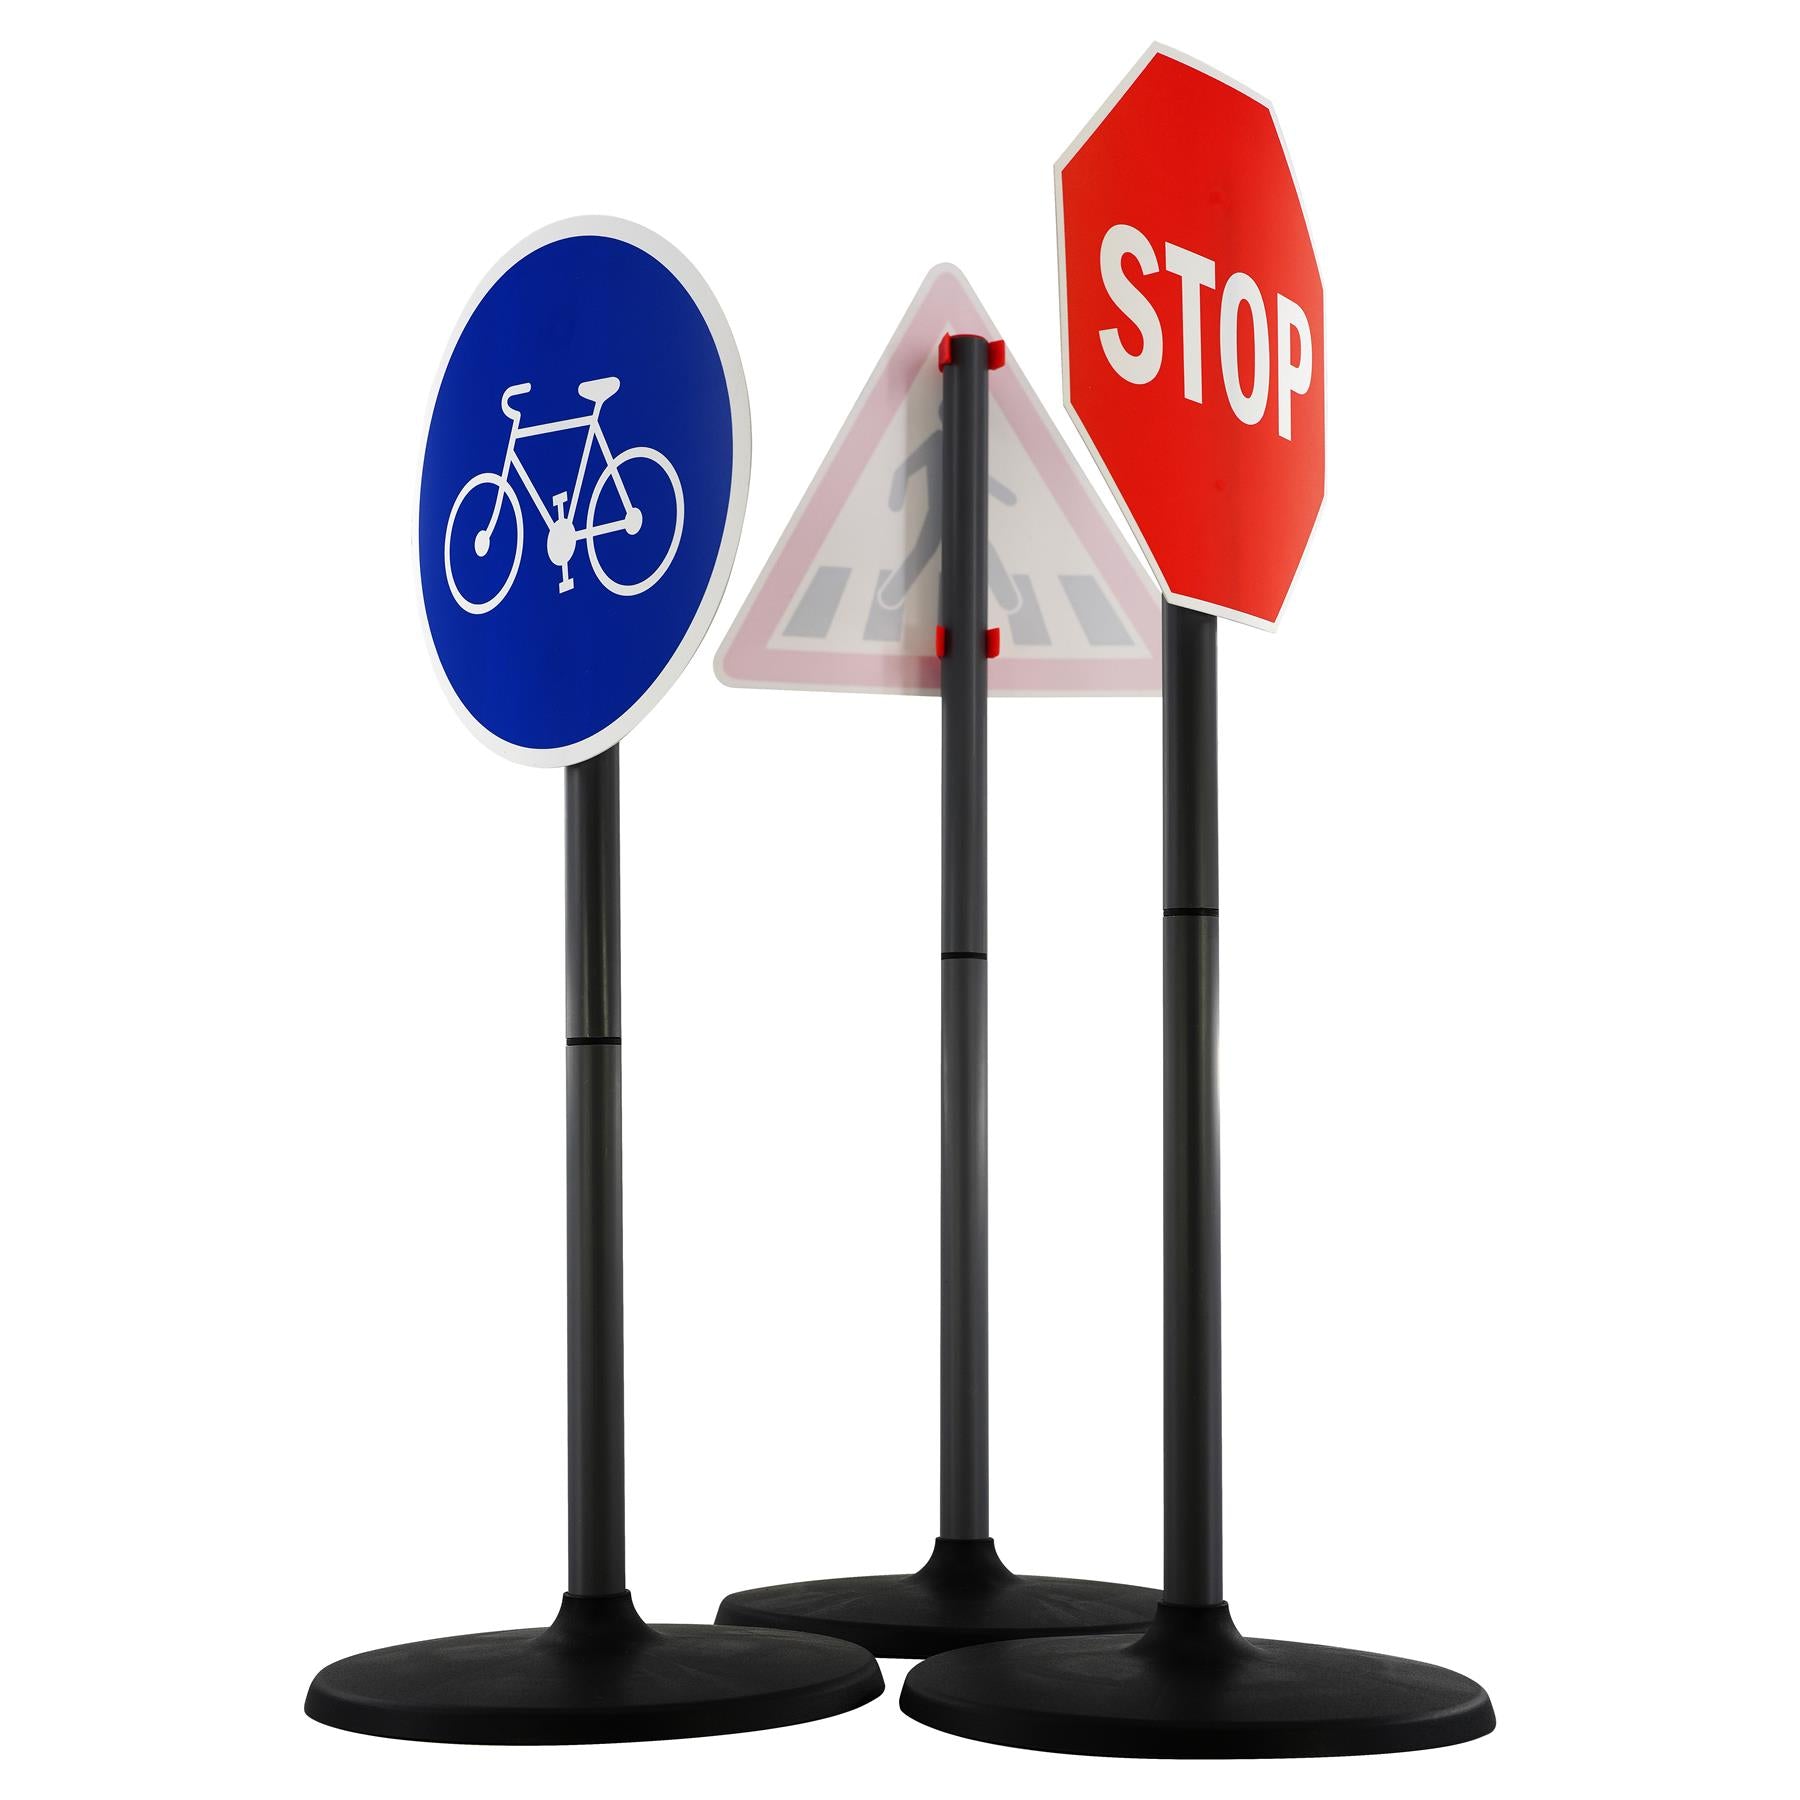 Set of Road Signs and Traffic Lights by The Magic Toy Shop - The Magic Toy Shop